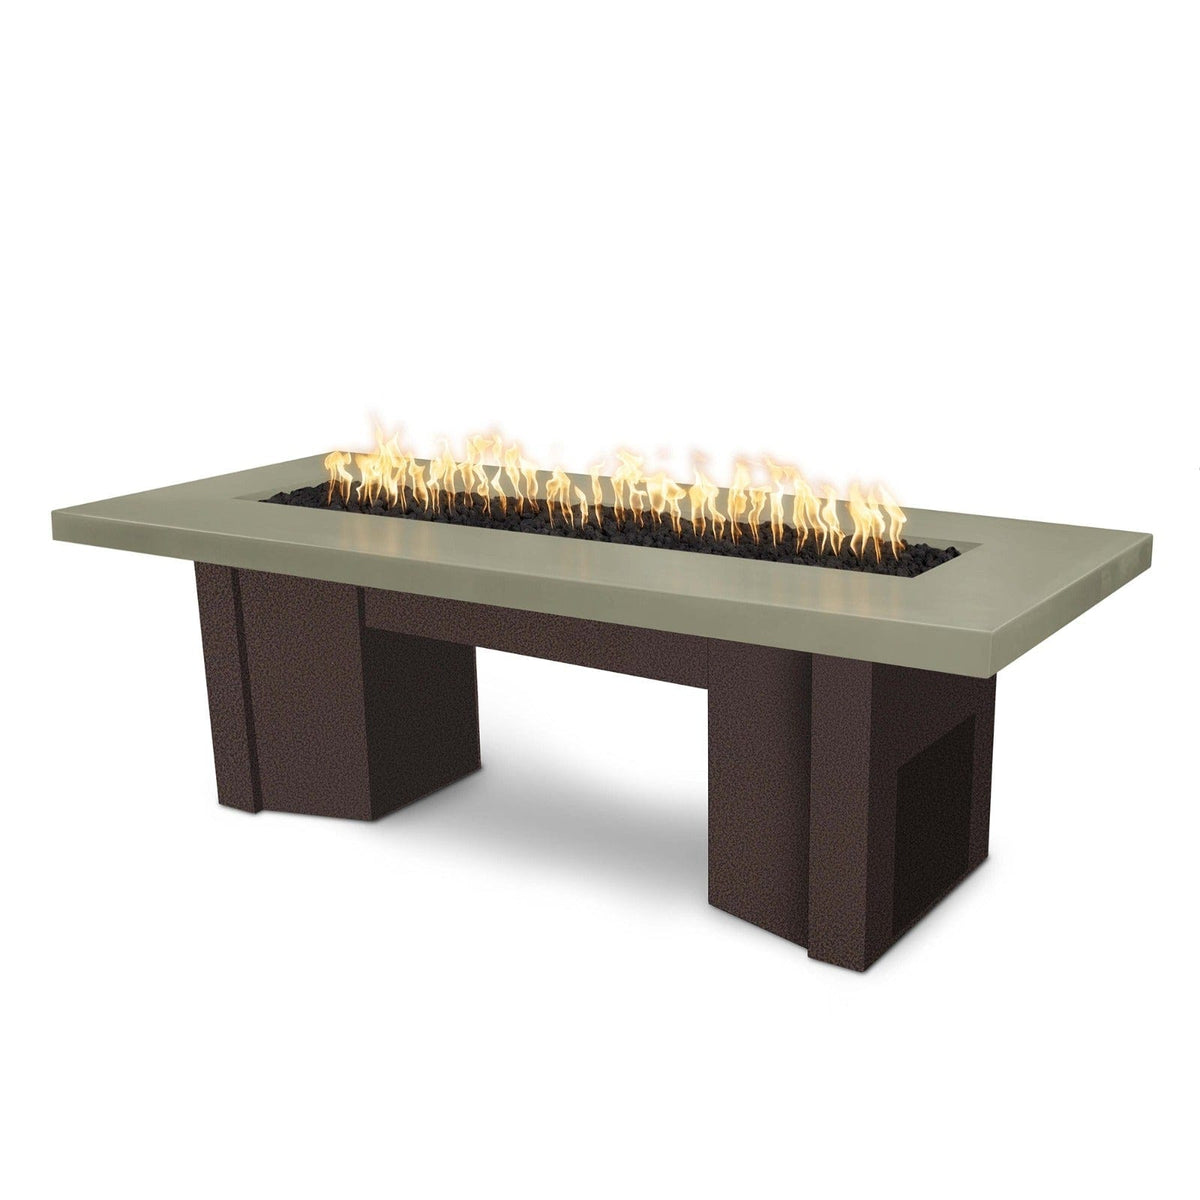 The Outdoor Plus Fire Features Ash (-ASH) / Copper Vein Powder Coated Steel (-CPV) The Outdoor Plus 60&quot; Alameda Fire Table Smooth Concrete in Liquid Propane - 110V Plug &amp; Play Electronic Ignition / OPT-ALMGFRC60EKIT-LP